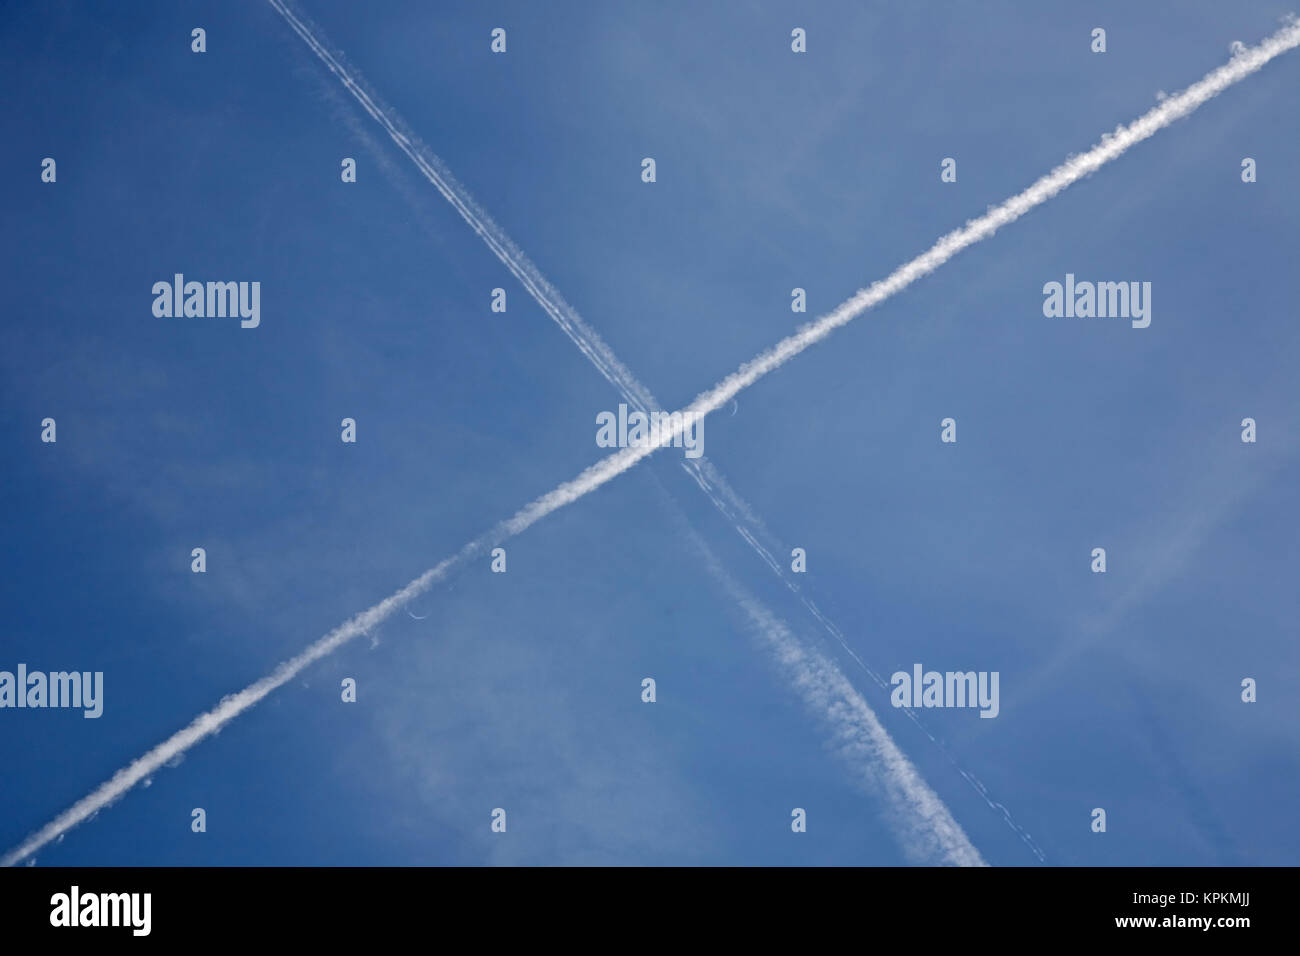 Aircraft vapour trails or contrails across a blue sky, forming a rough St Andrew's cross. Stock Photo